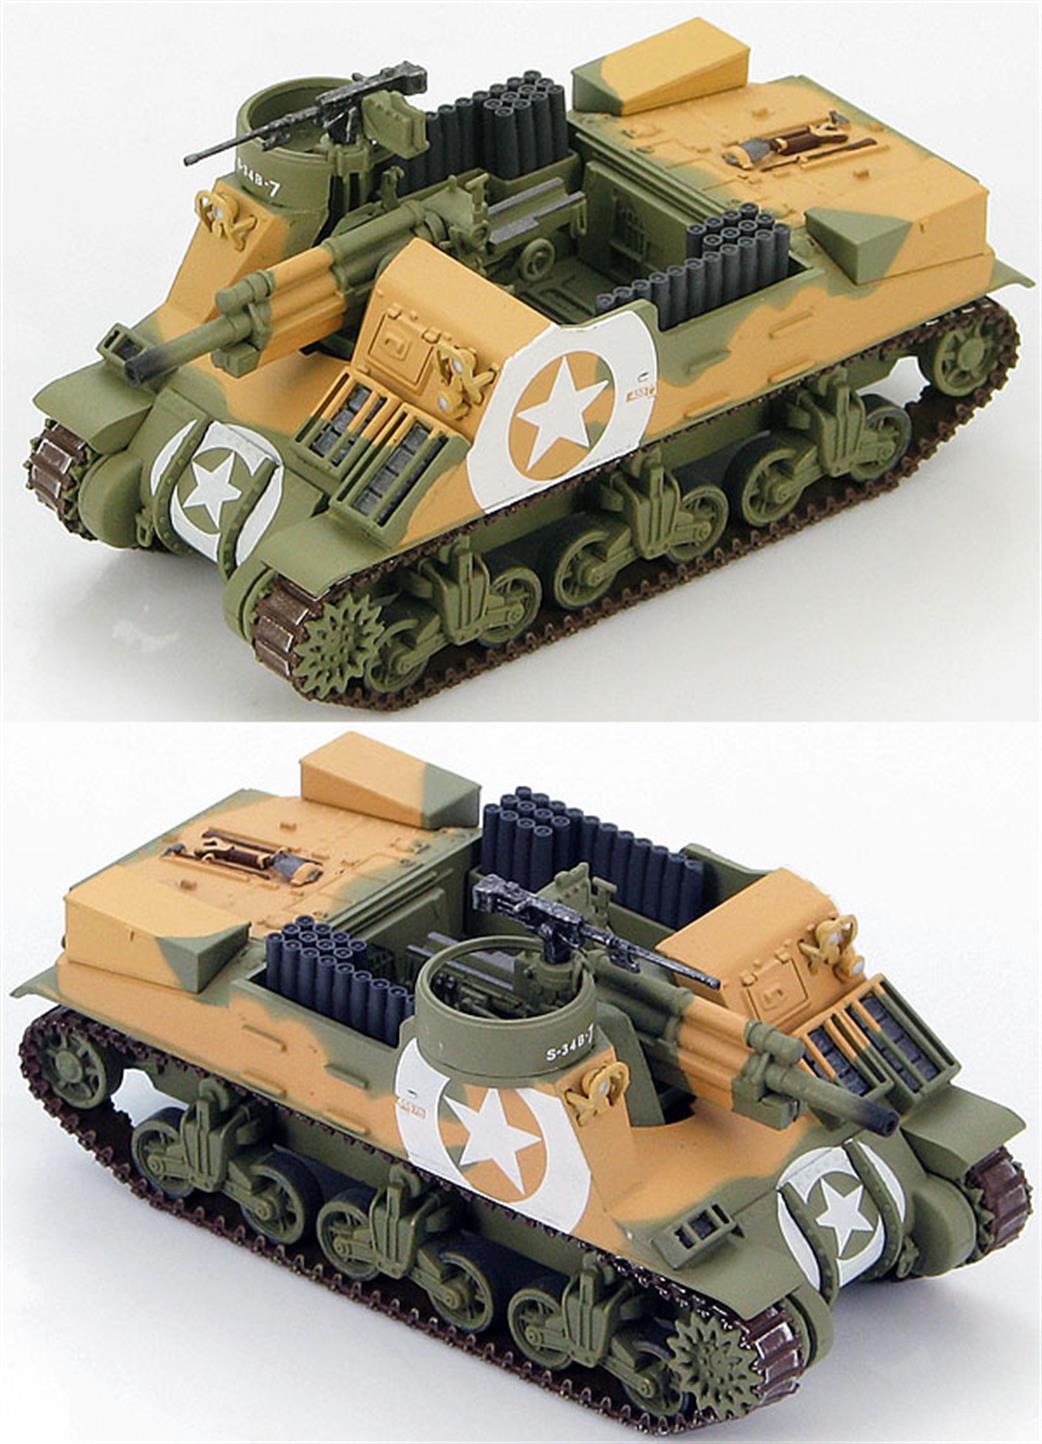 Hobby Master 1/72 HG4707 M7 Priest 105mm HMC 2nd Armored Division, Sicily, July 1943